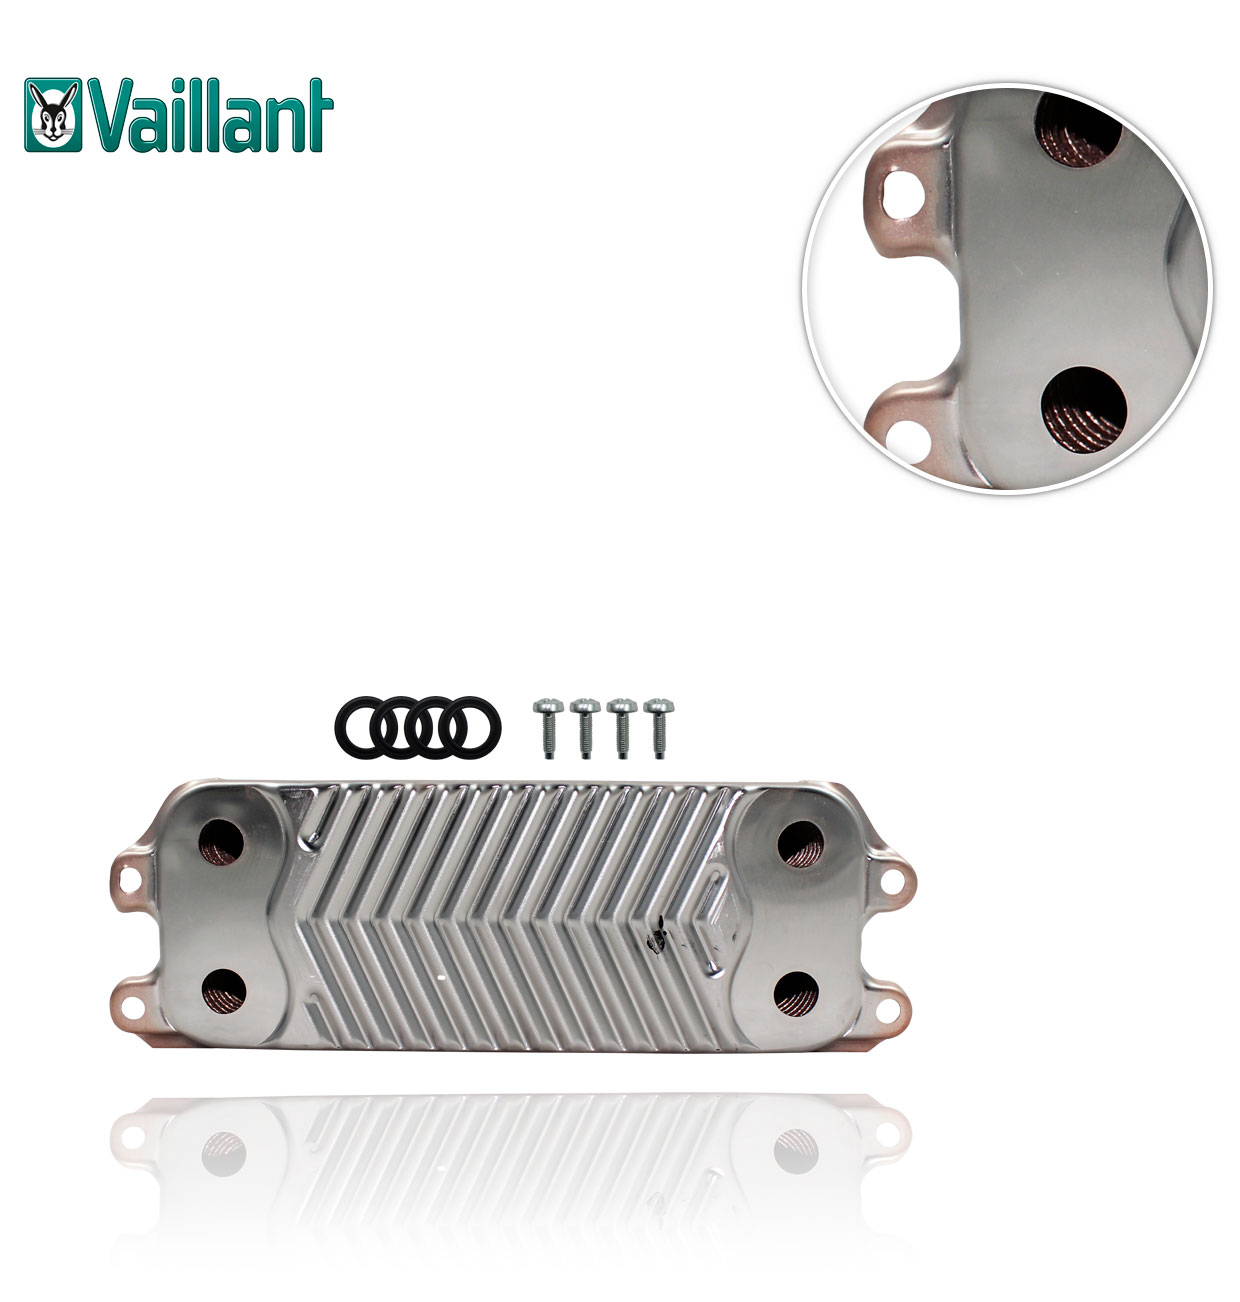 VAILLANT 0020025041 35 PLATE EXCHANGER